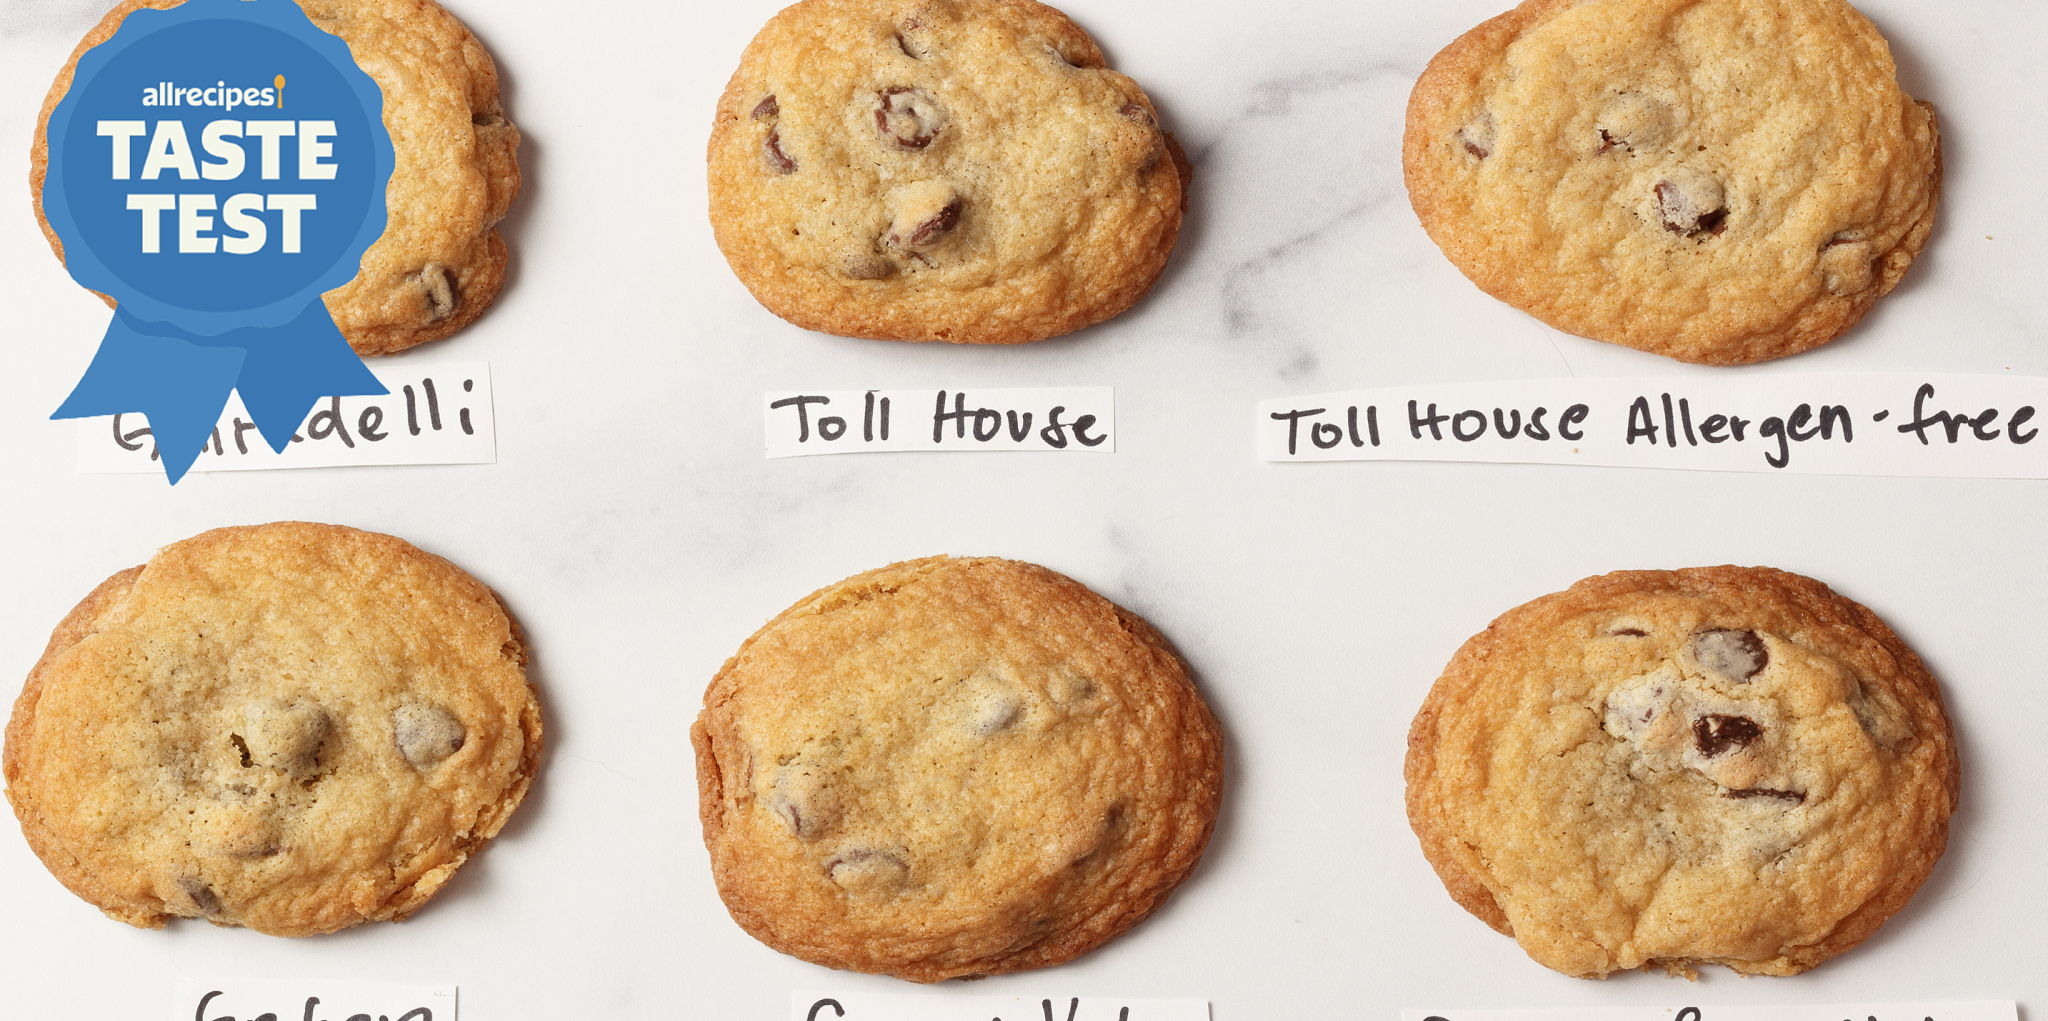 We Tried 6 Brands of Chocolate Chips and These Are the Only Ones We'll Use From Now On